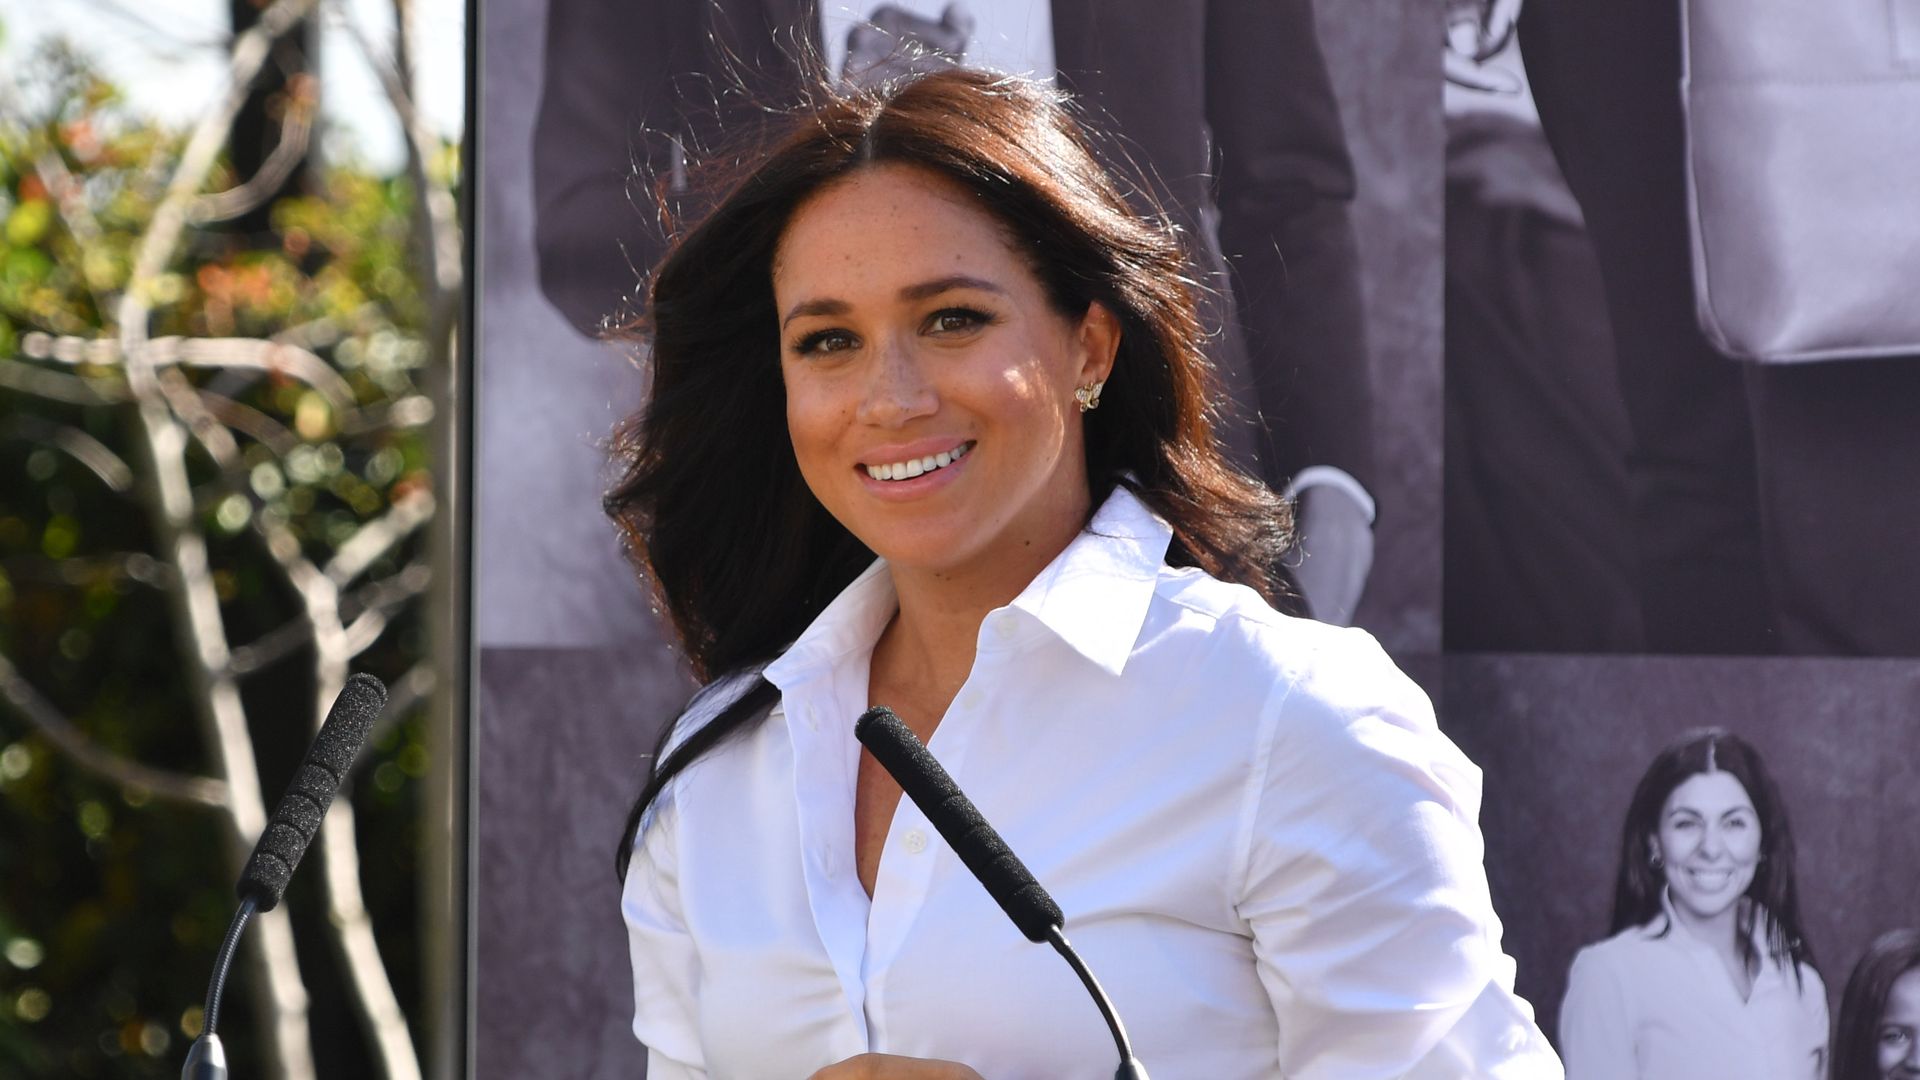 Meghan Markle's new brand will give 'glimpse into Montecito lifestyle'